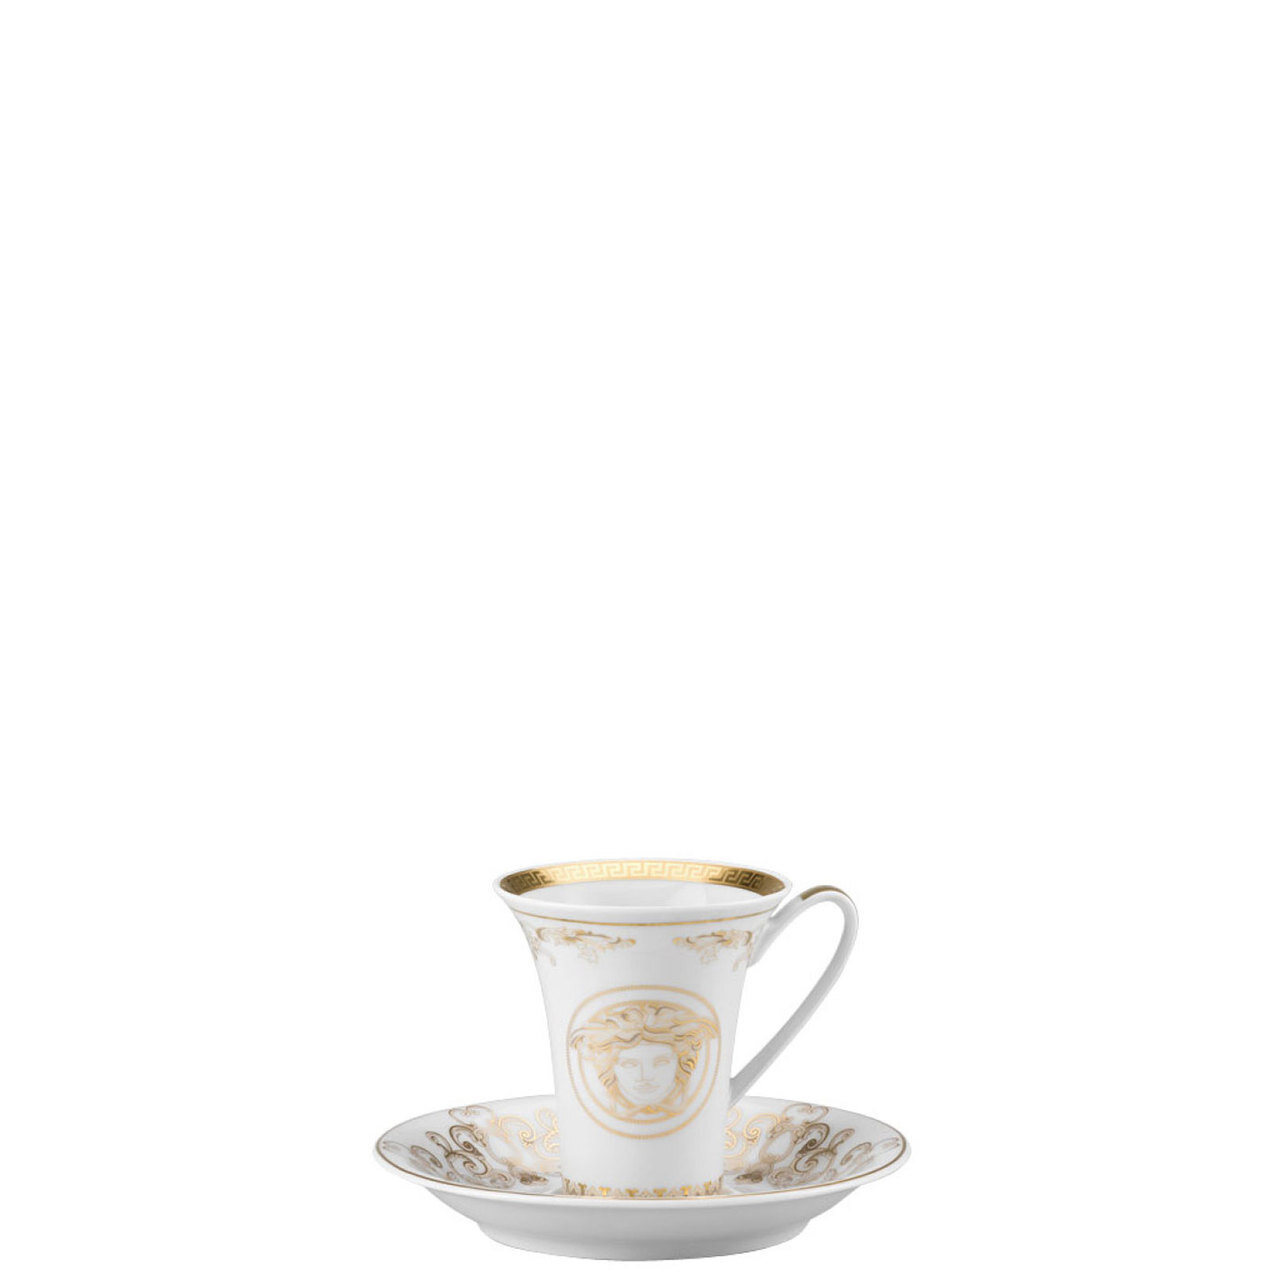 Versace Medusa Gala Gold AD Cup and Saucer 5 Inch